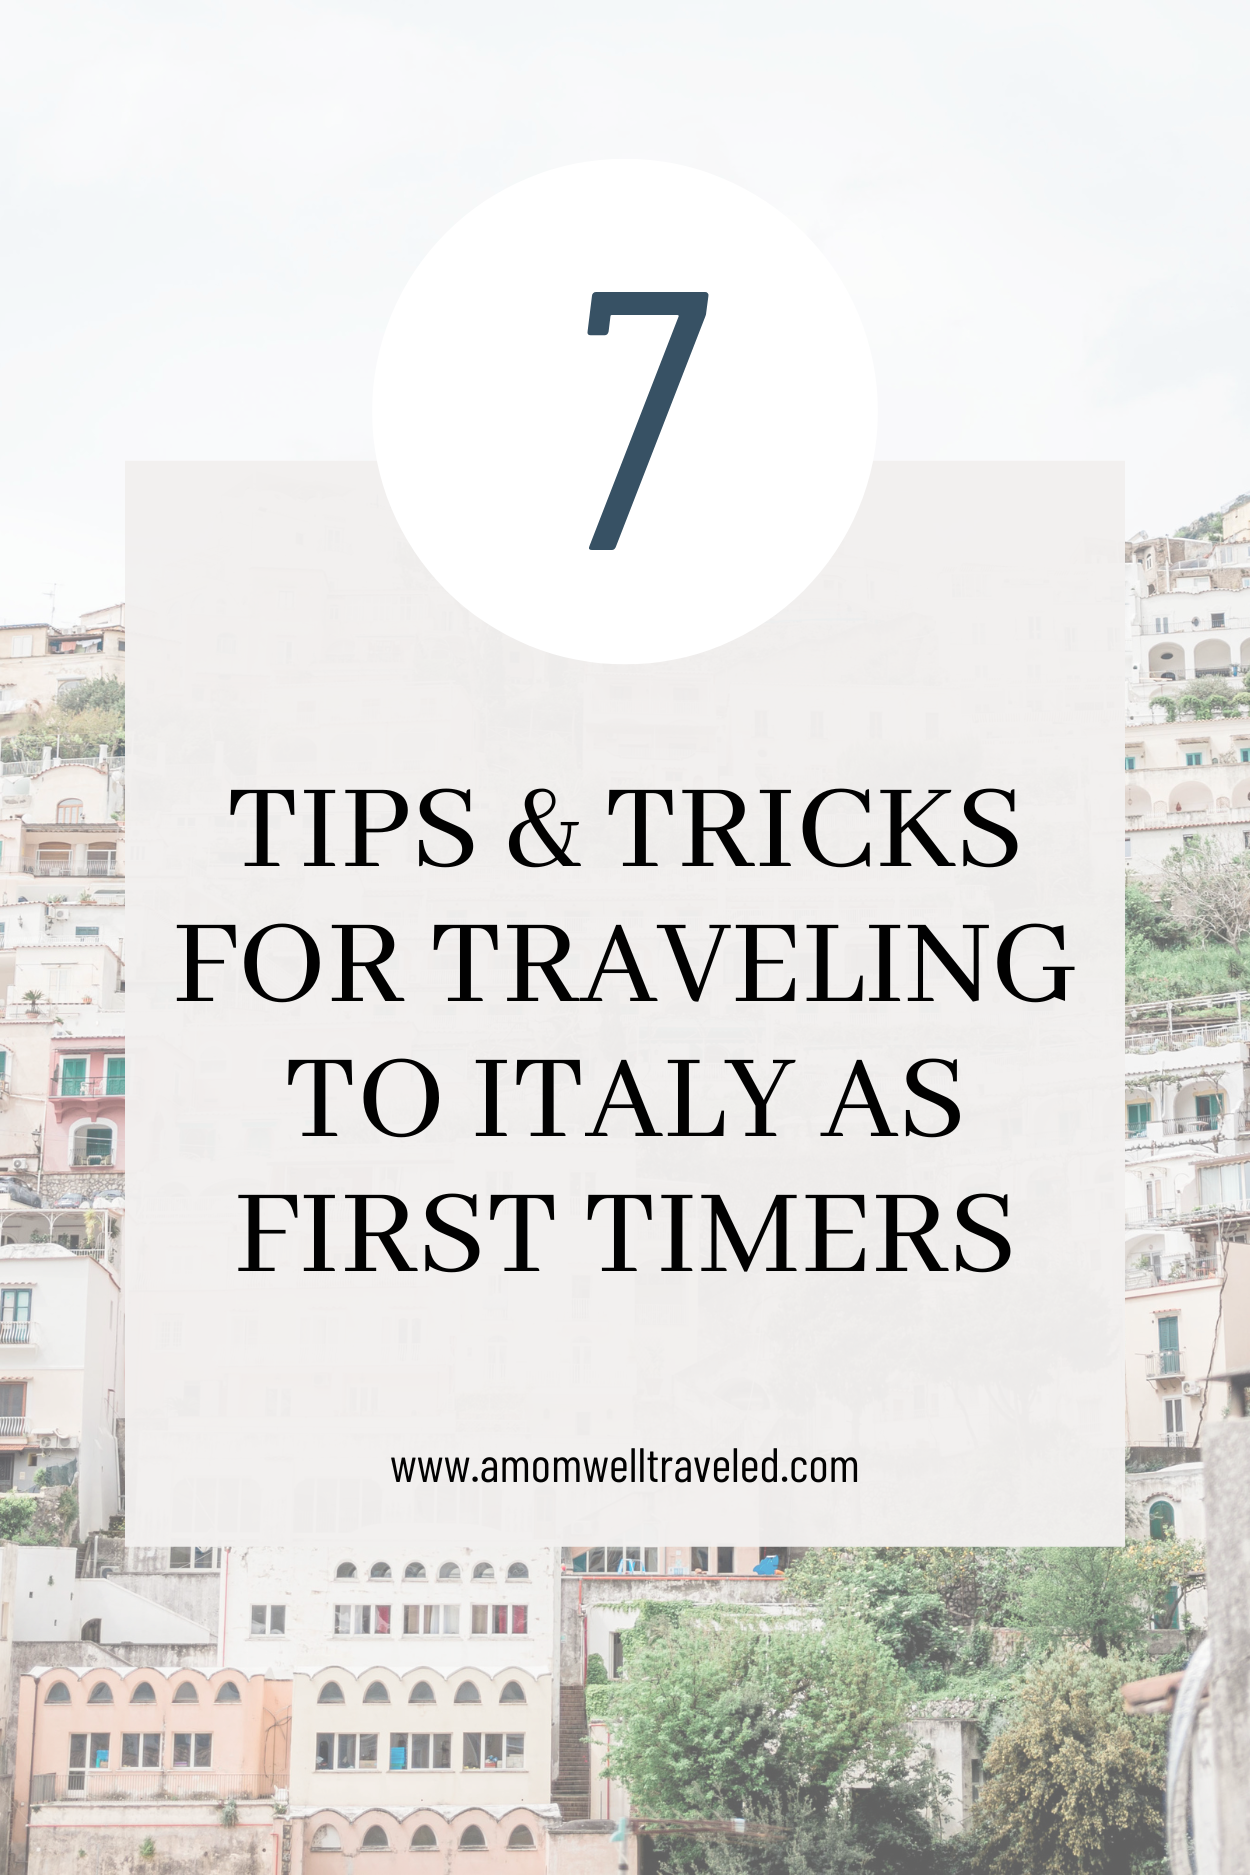 7 Tips & Tricks for Traveling to Italy as First Timers from A Mom Well Traveled Blog